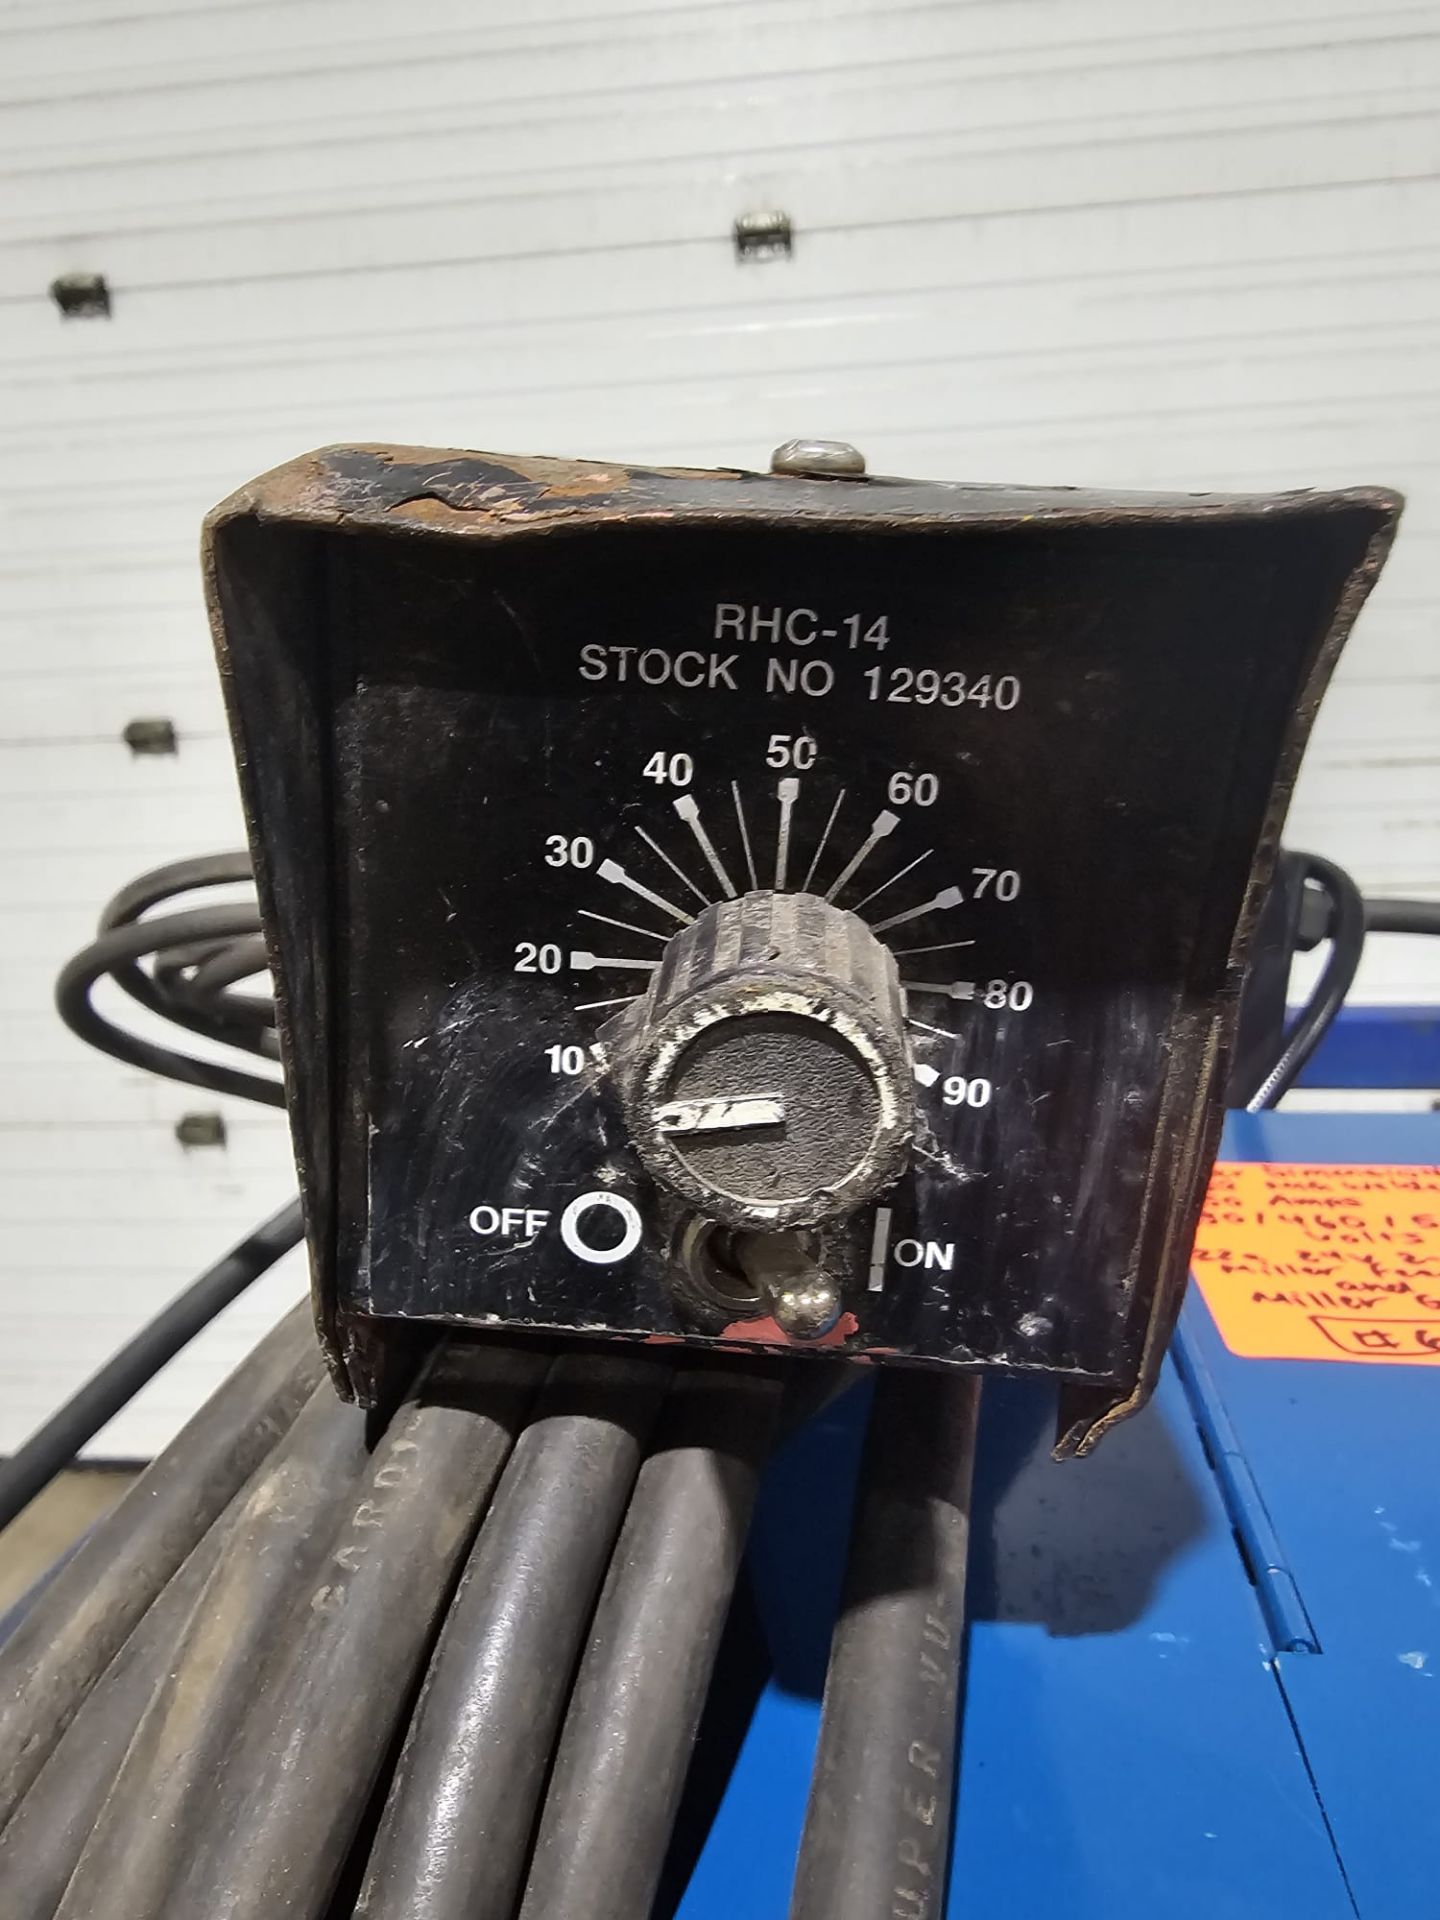 Miller Dimension 652 Mig Welder 650 Amp Mig Tig Stick Multi Process Power Source with 22A Wire - Image 8 of 10